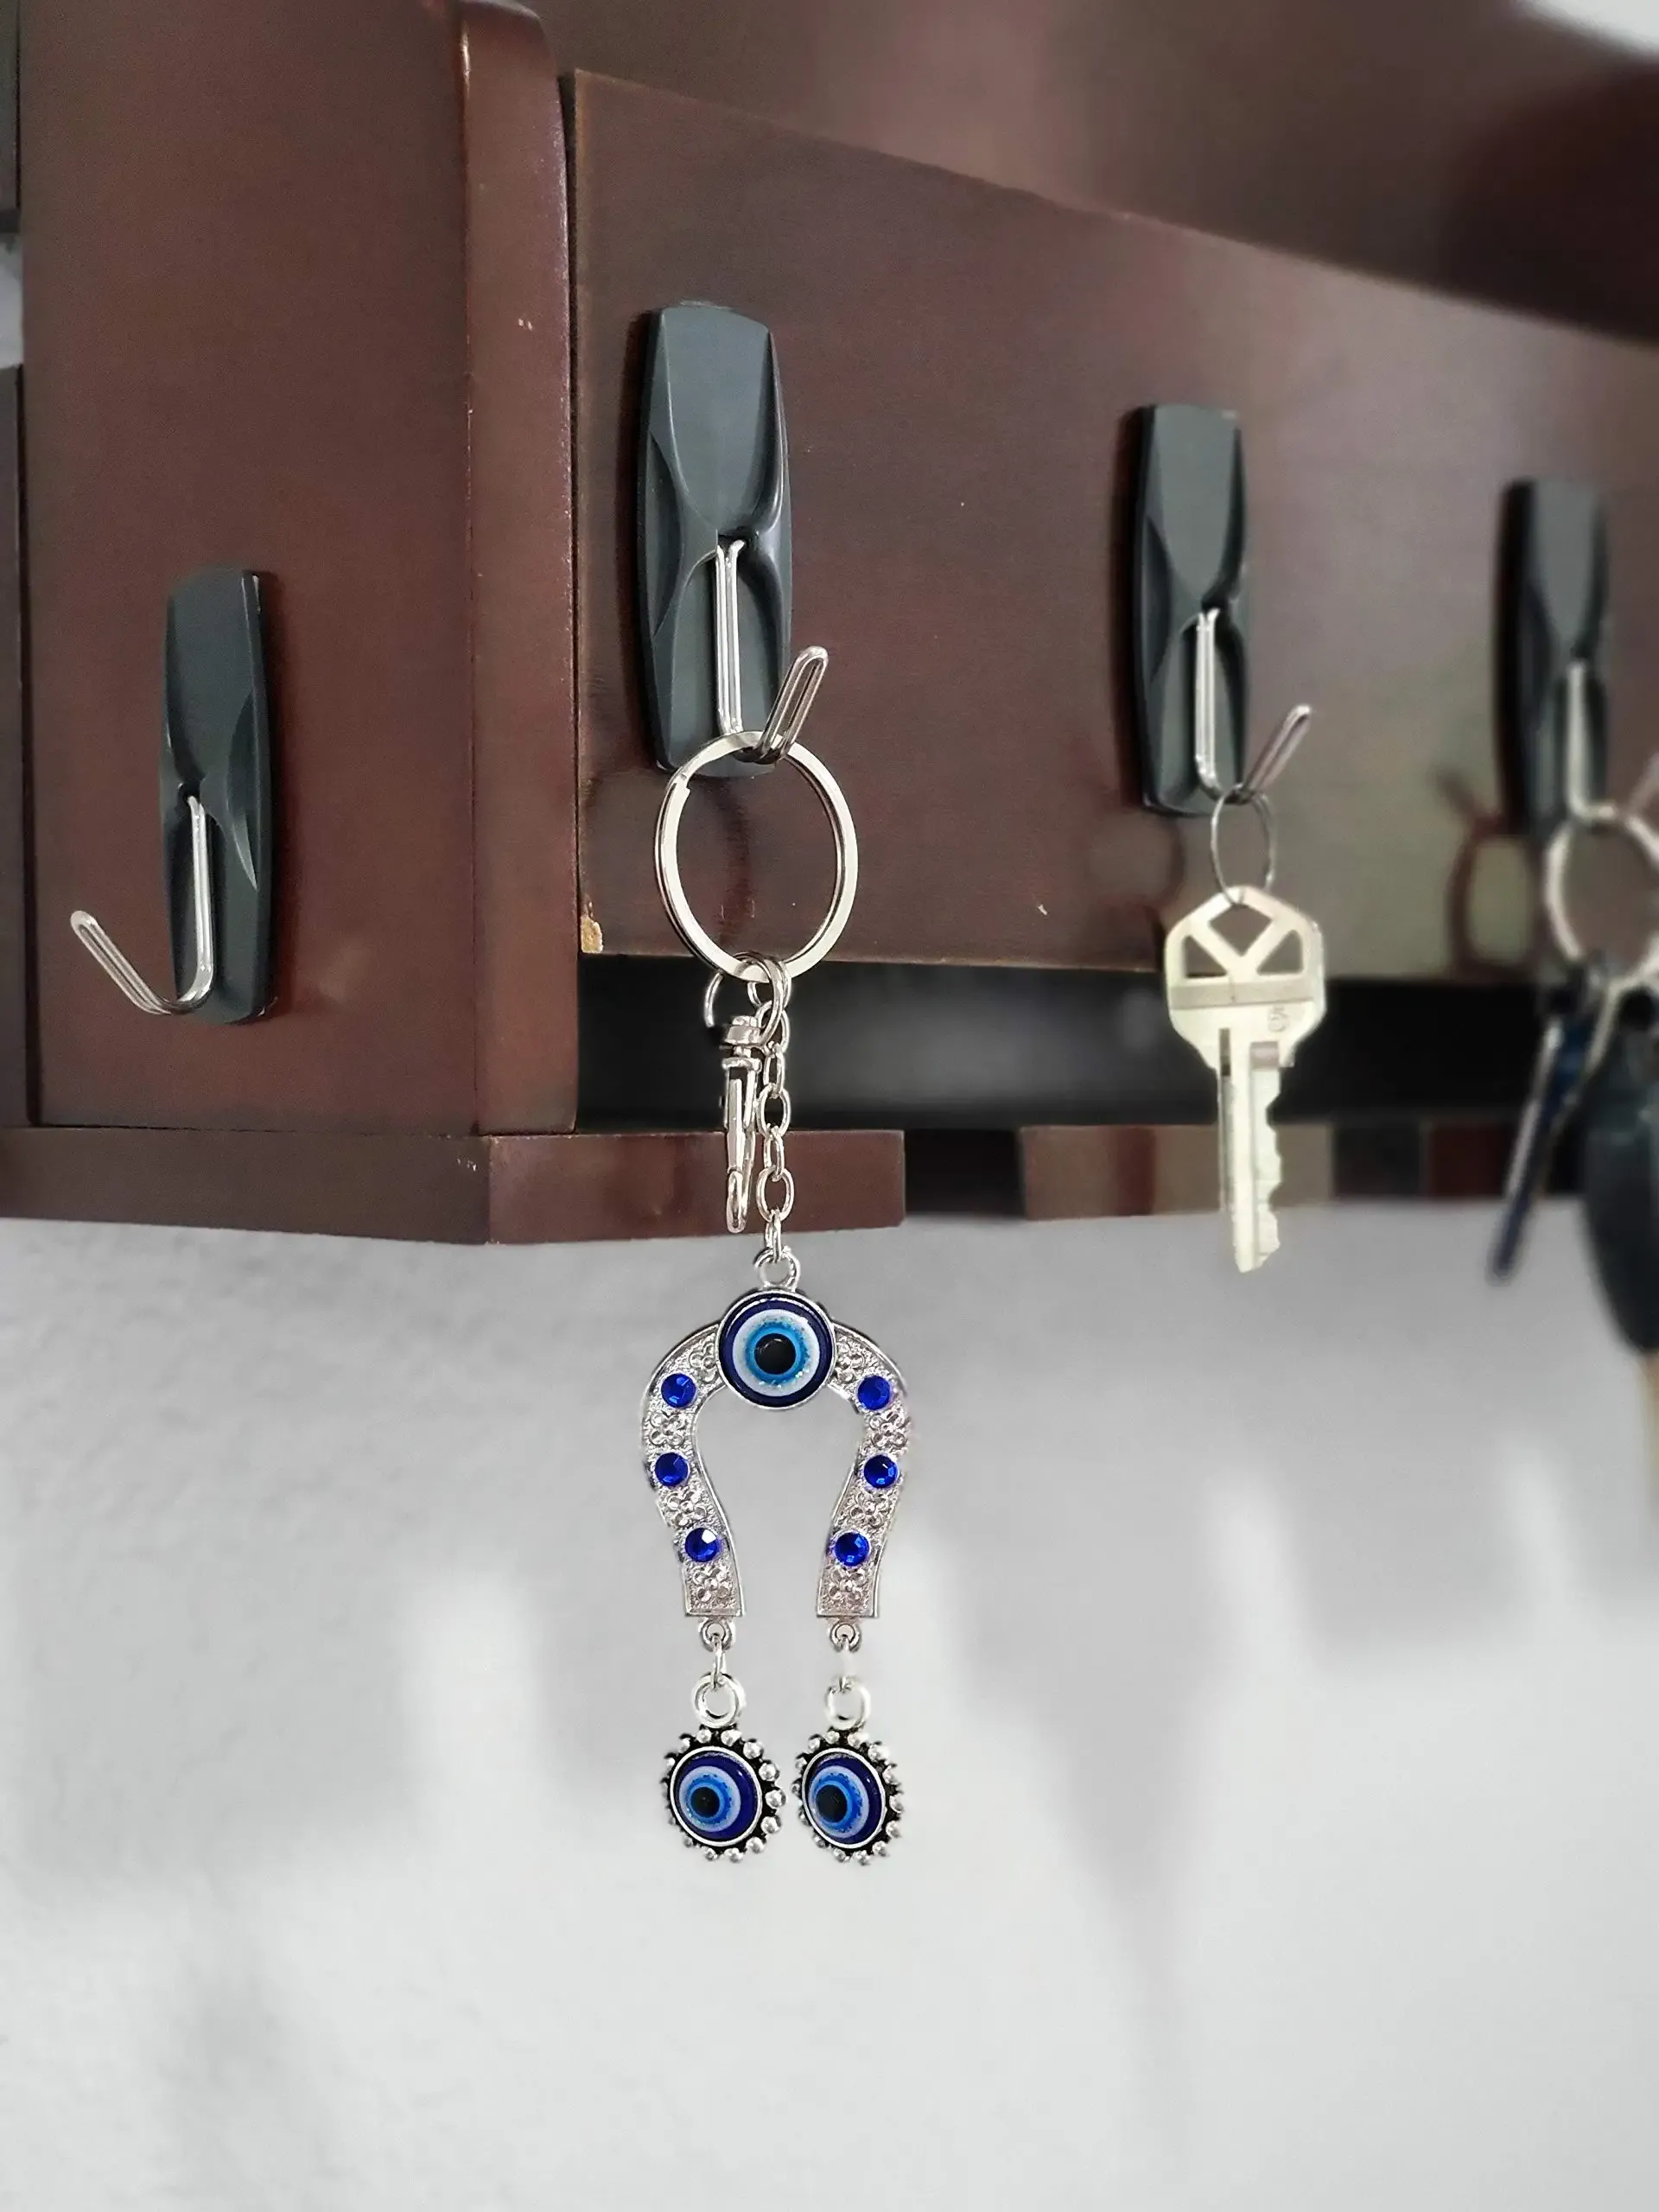 3ml bravo team lucky horse shoe with blue crystal hanging evil eye charms keychain ring w/clasp sign of good fortune good luck blessing home bags car rear view mirror hanging accessories